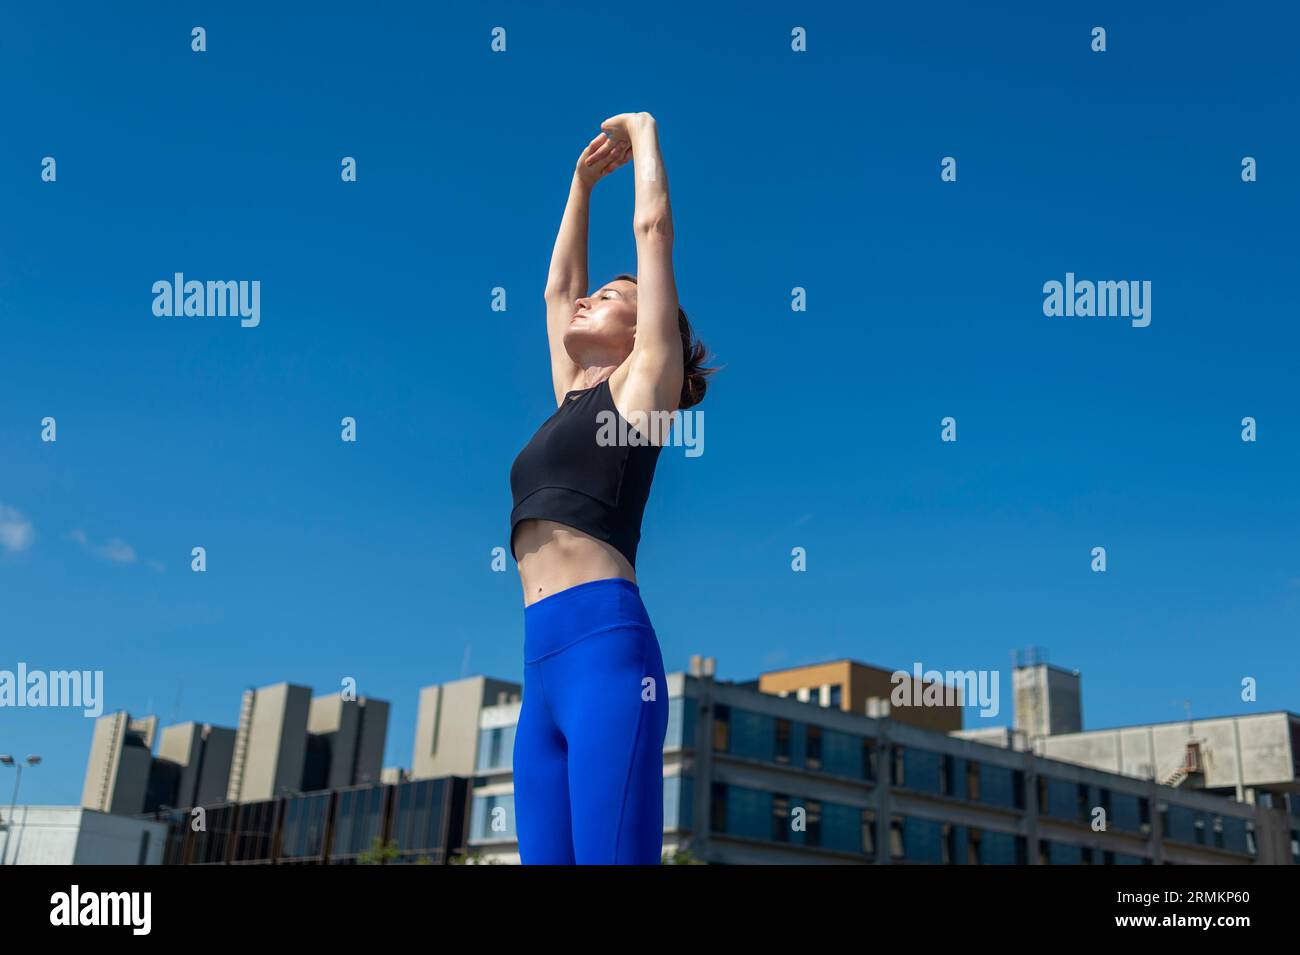 Woman stretches her arms above her head as she prepares to exercise Stock Photo